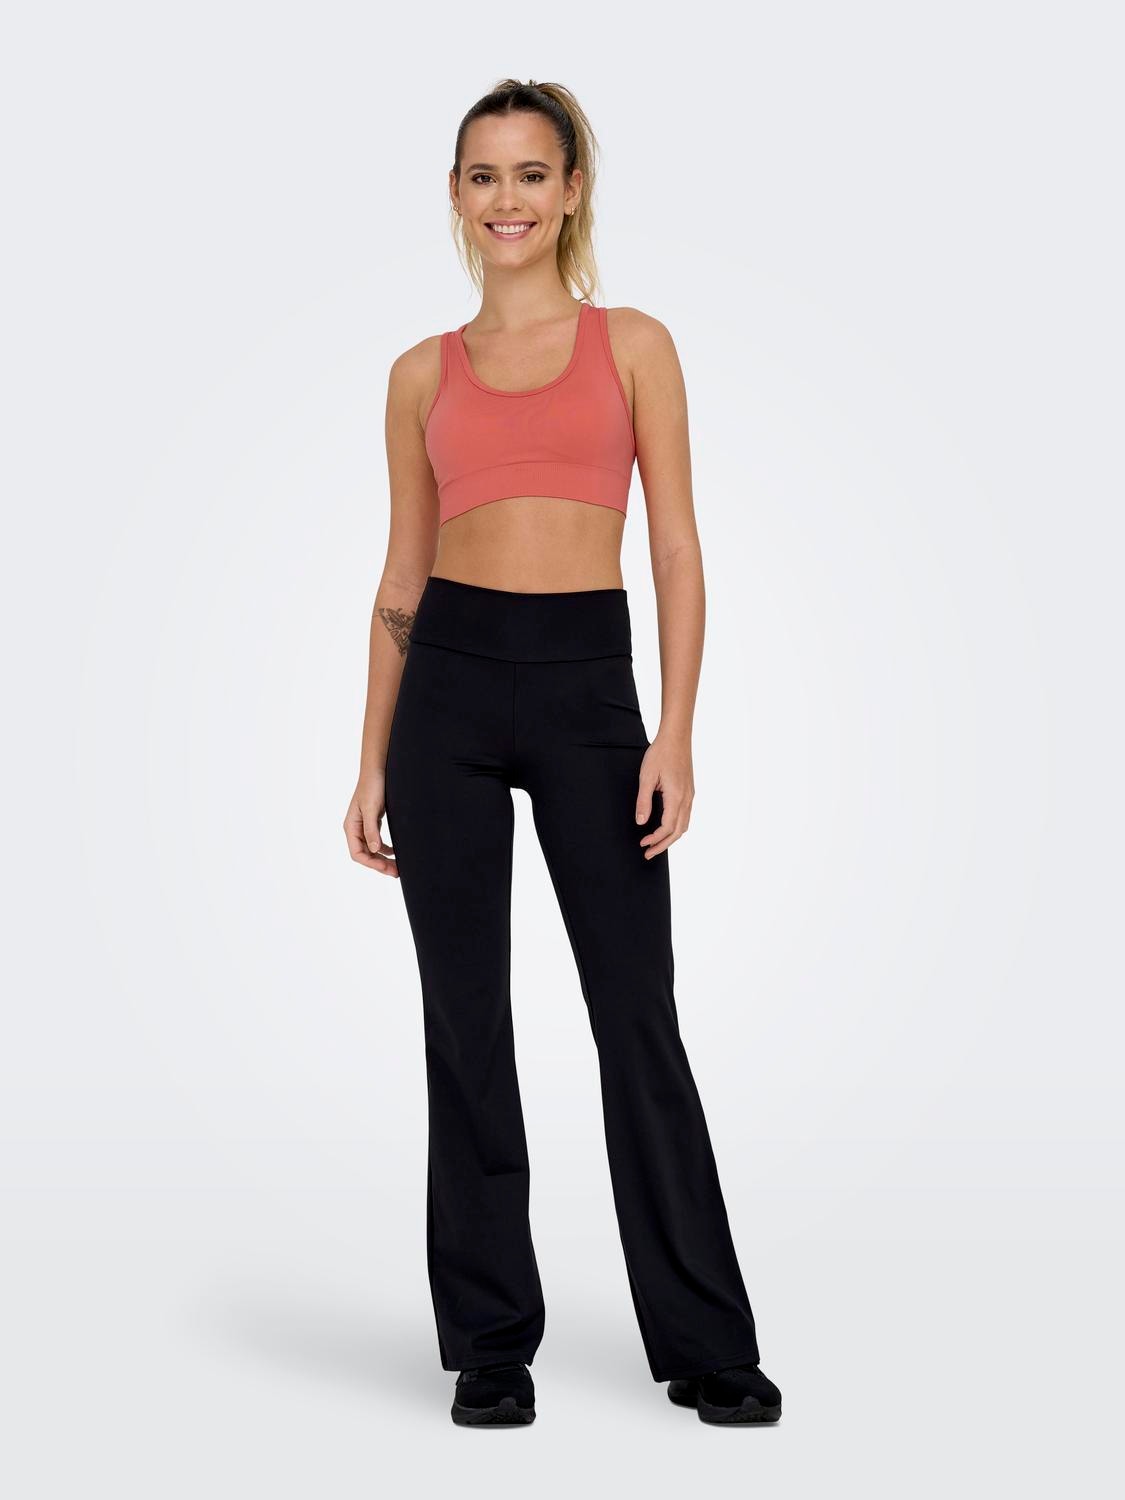 ONLY Seamless Sports-BH -Spiced Coral - 15101974